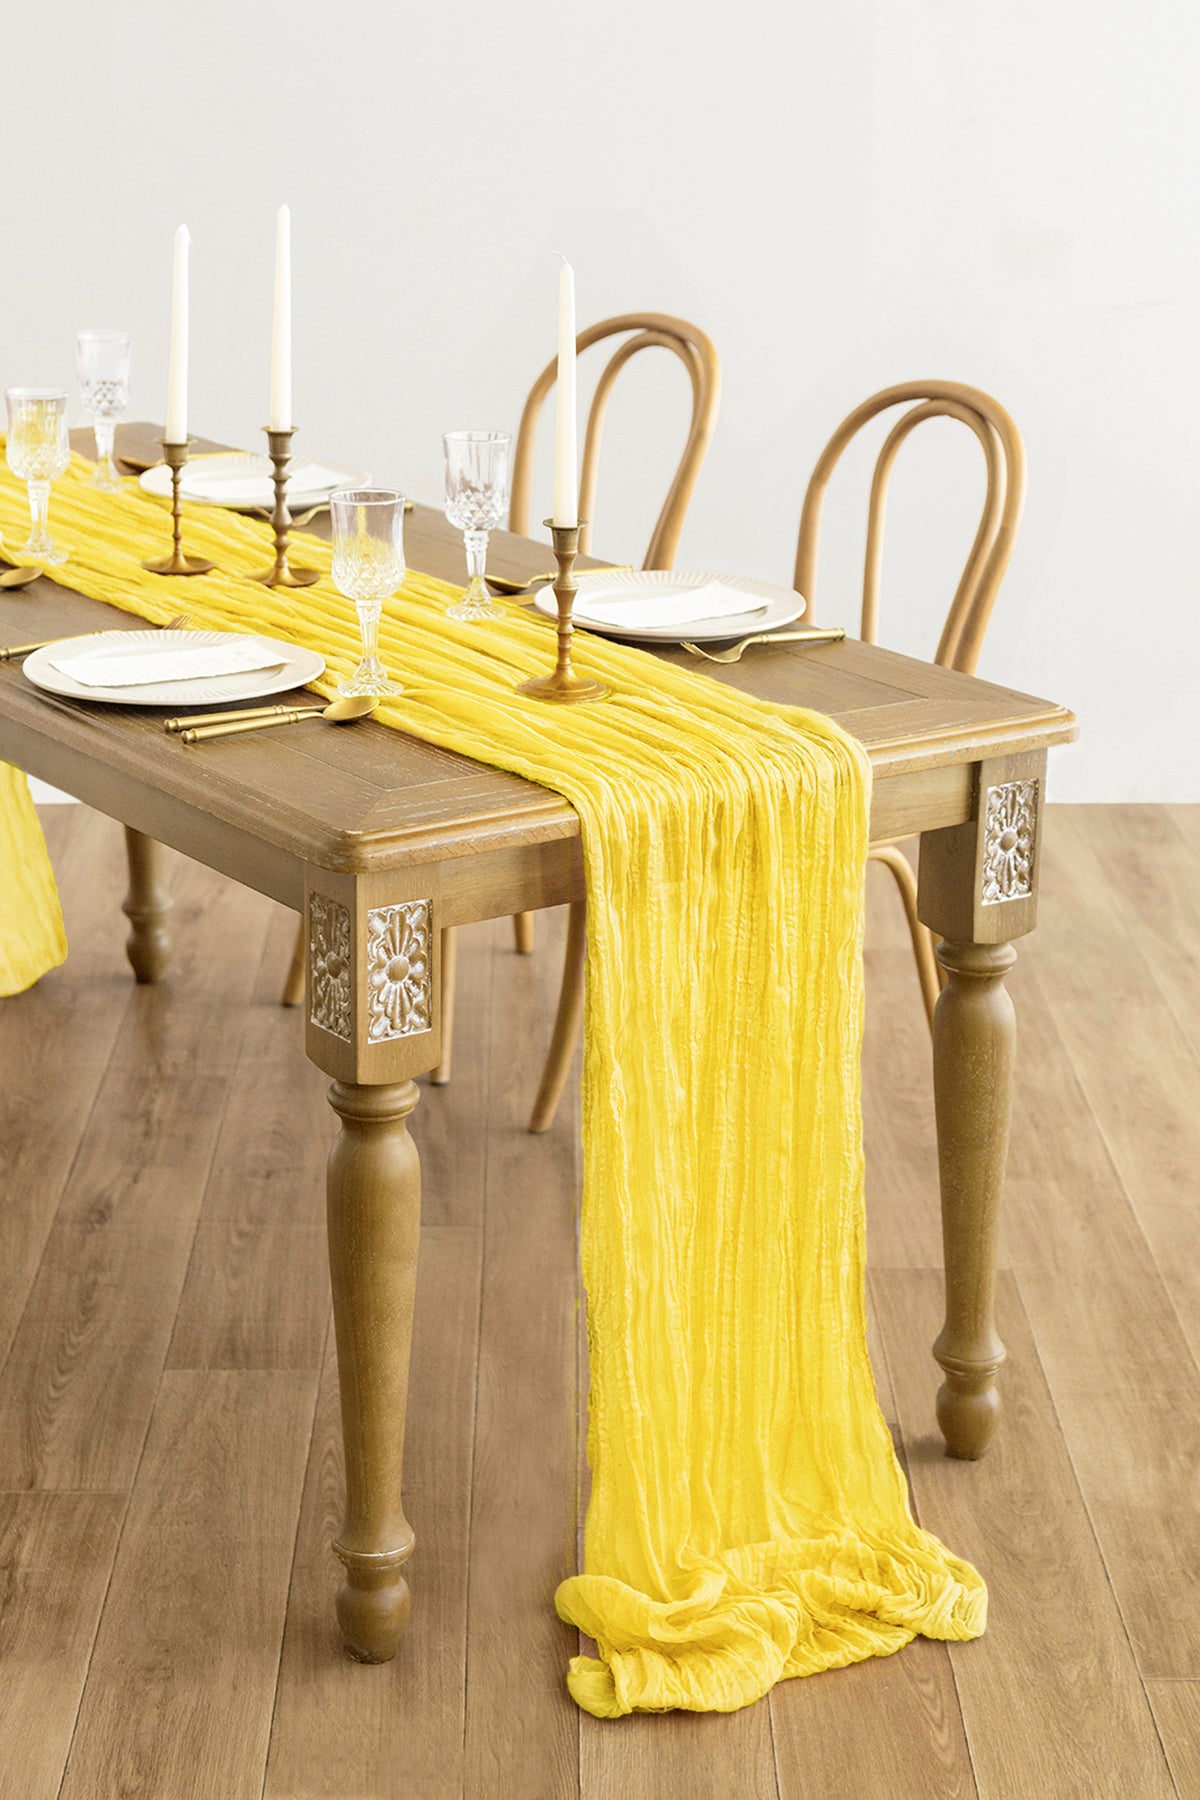 Cheesecloth Table Runner in Lemonade Yellow